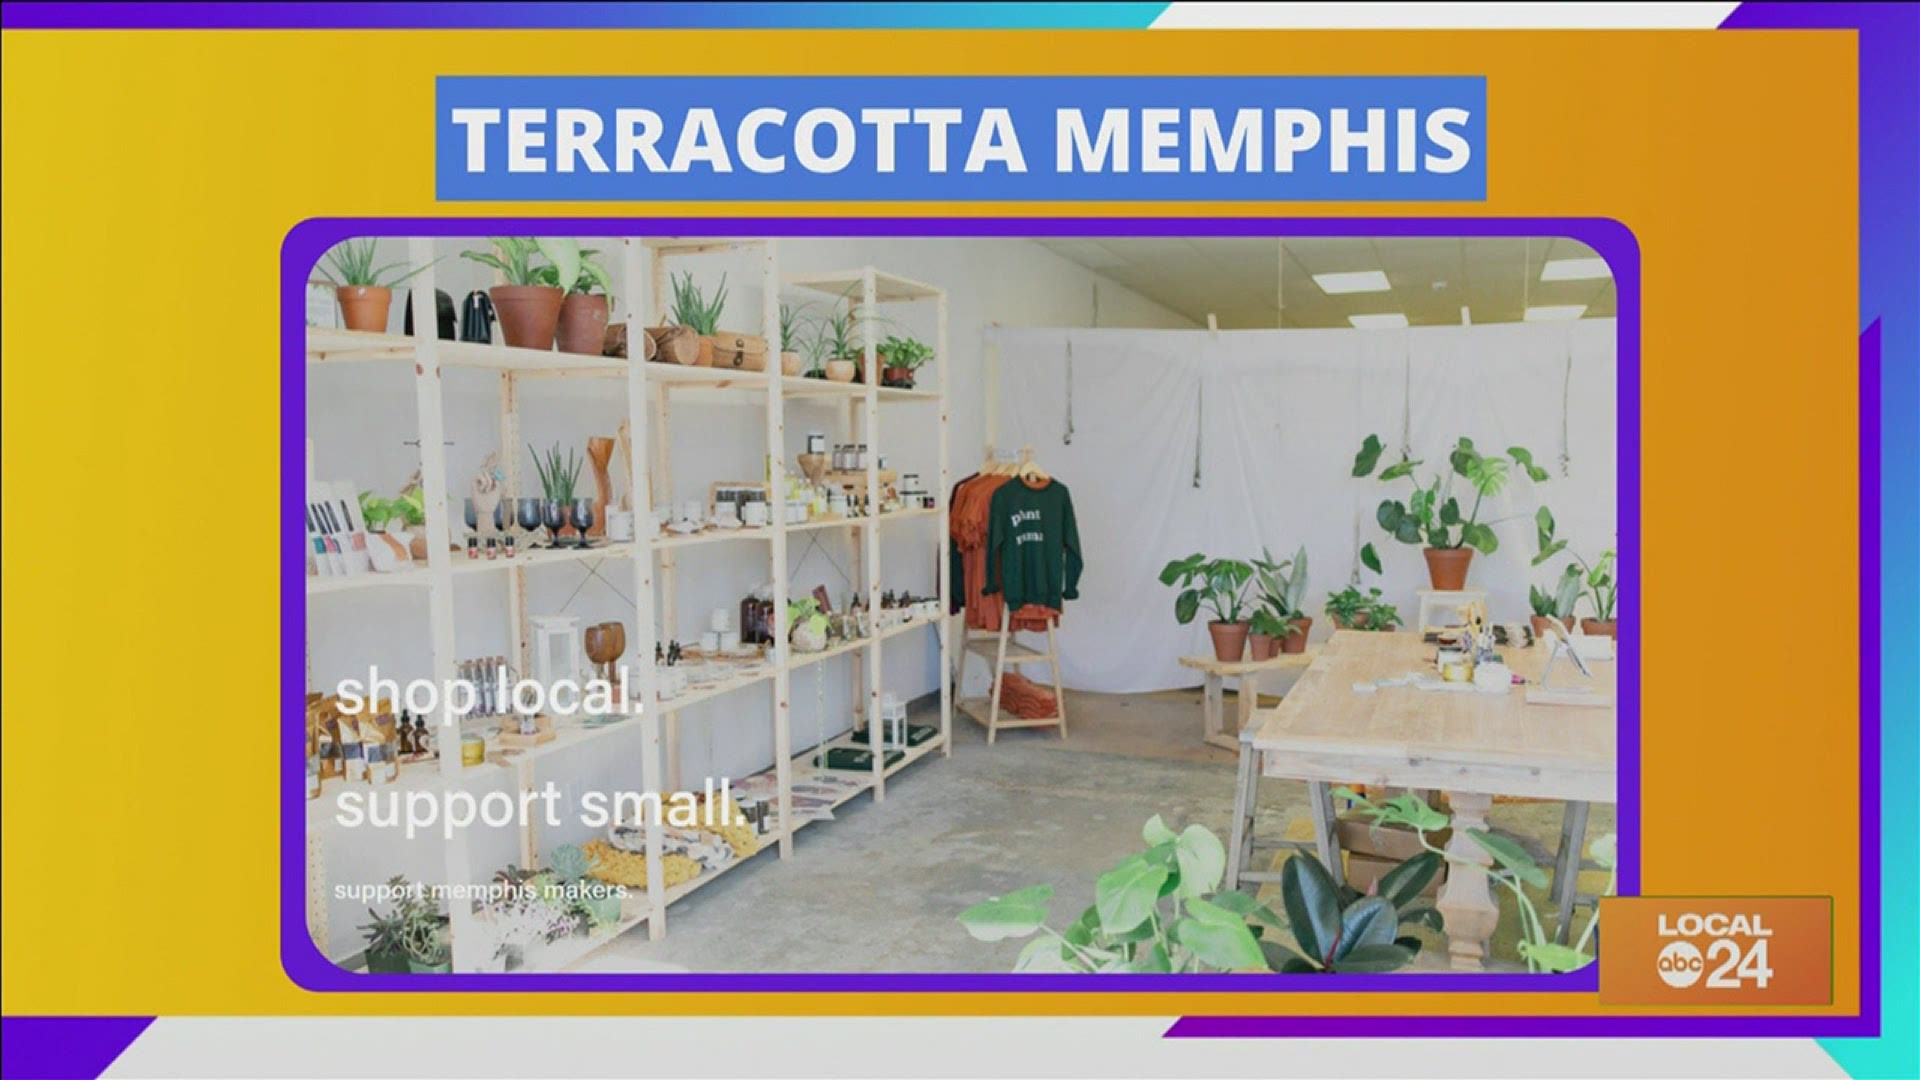 Whether you're looking to become a plant parent or need a place to sell your wares at at a reasonable price, check out Terracotta Memphis! :)